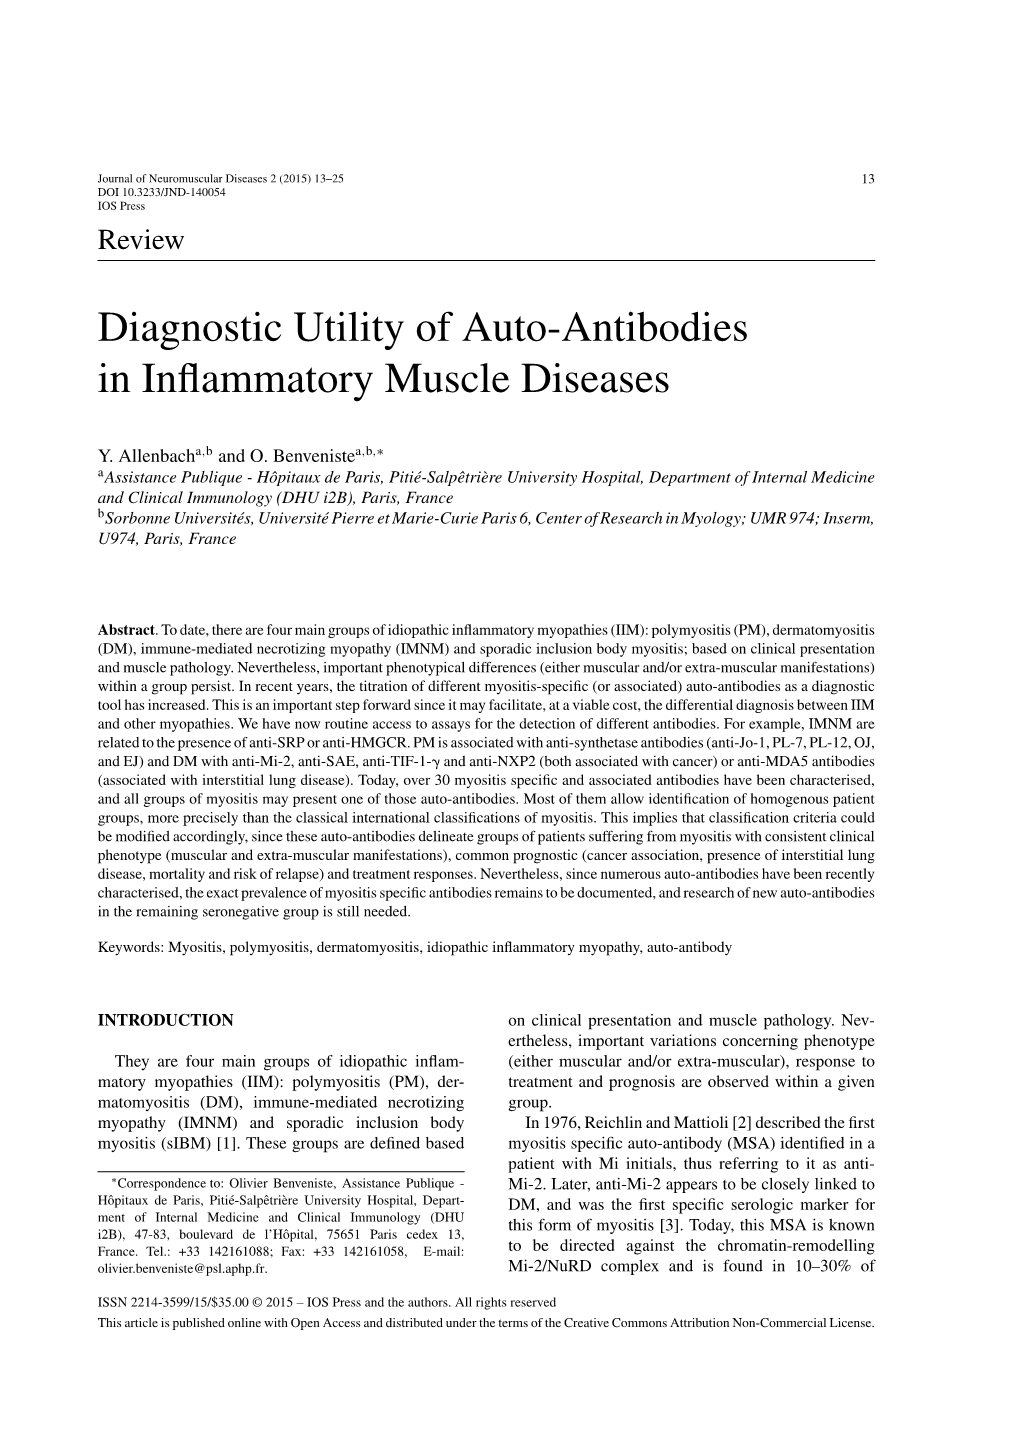 Diagnostic Utility of Auto-Antibodies in Inflammatory Muscle Diseases